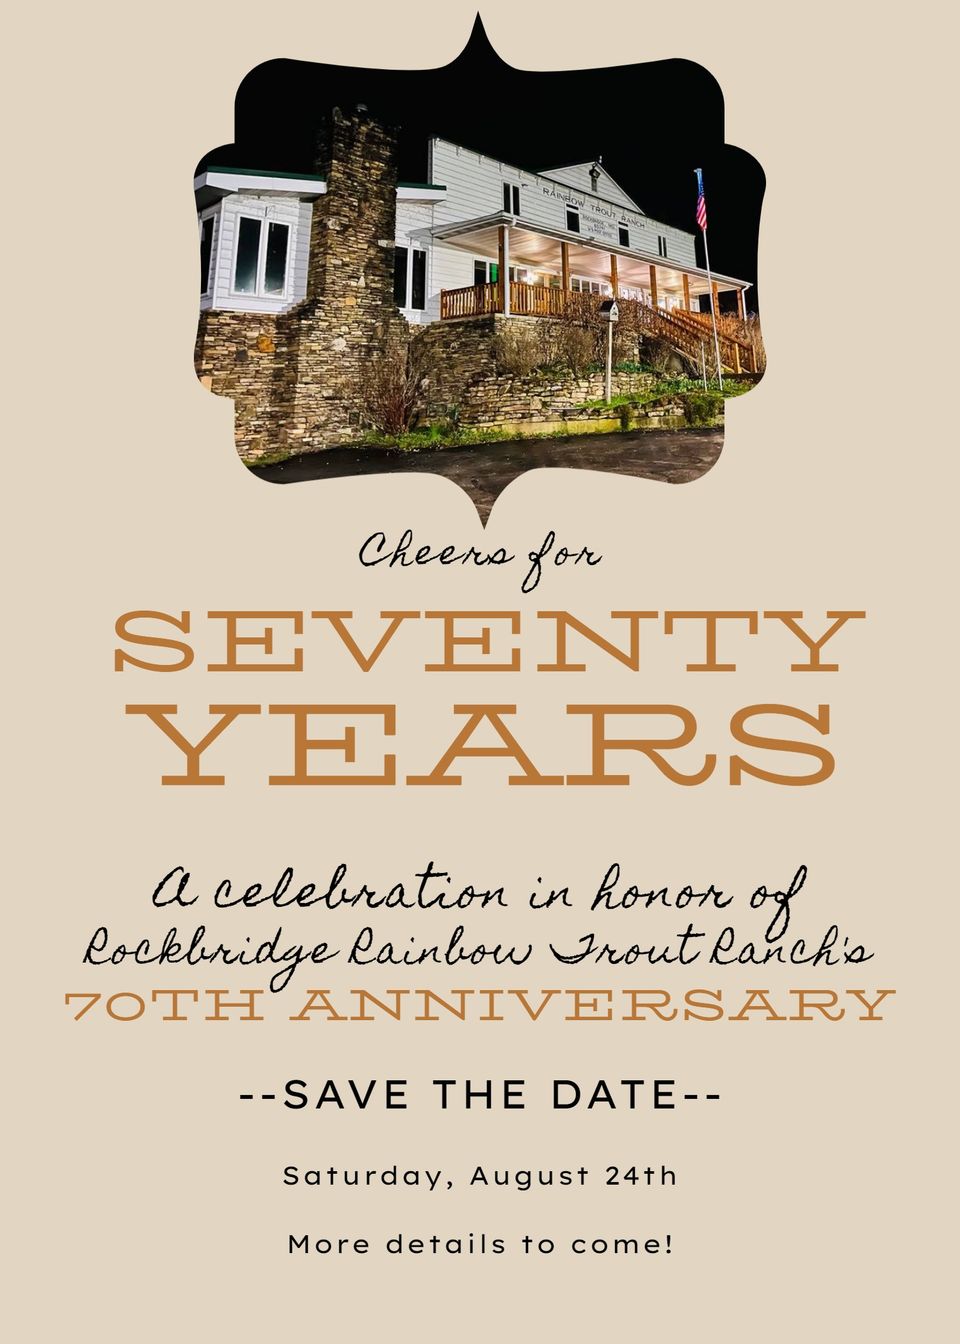 70th anniversary save the date no details